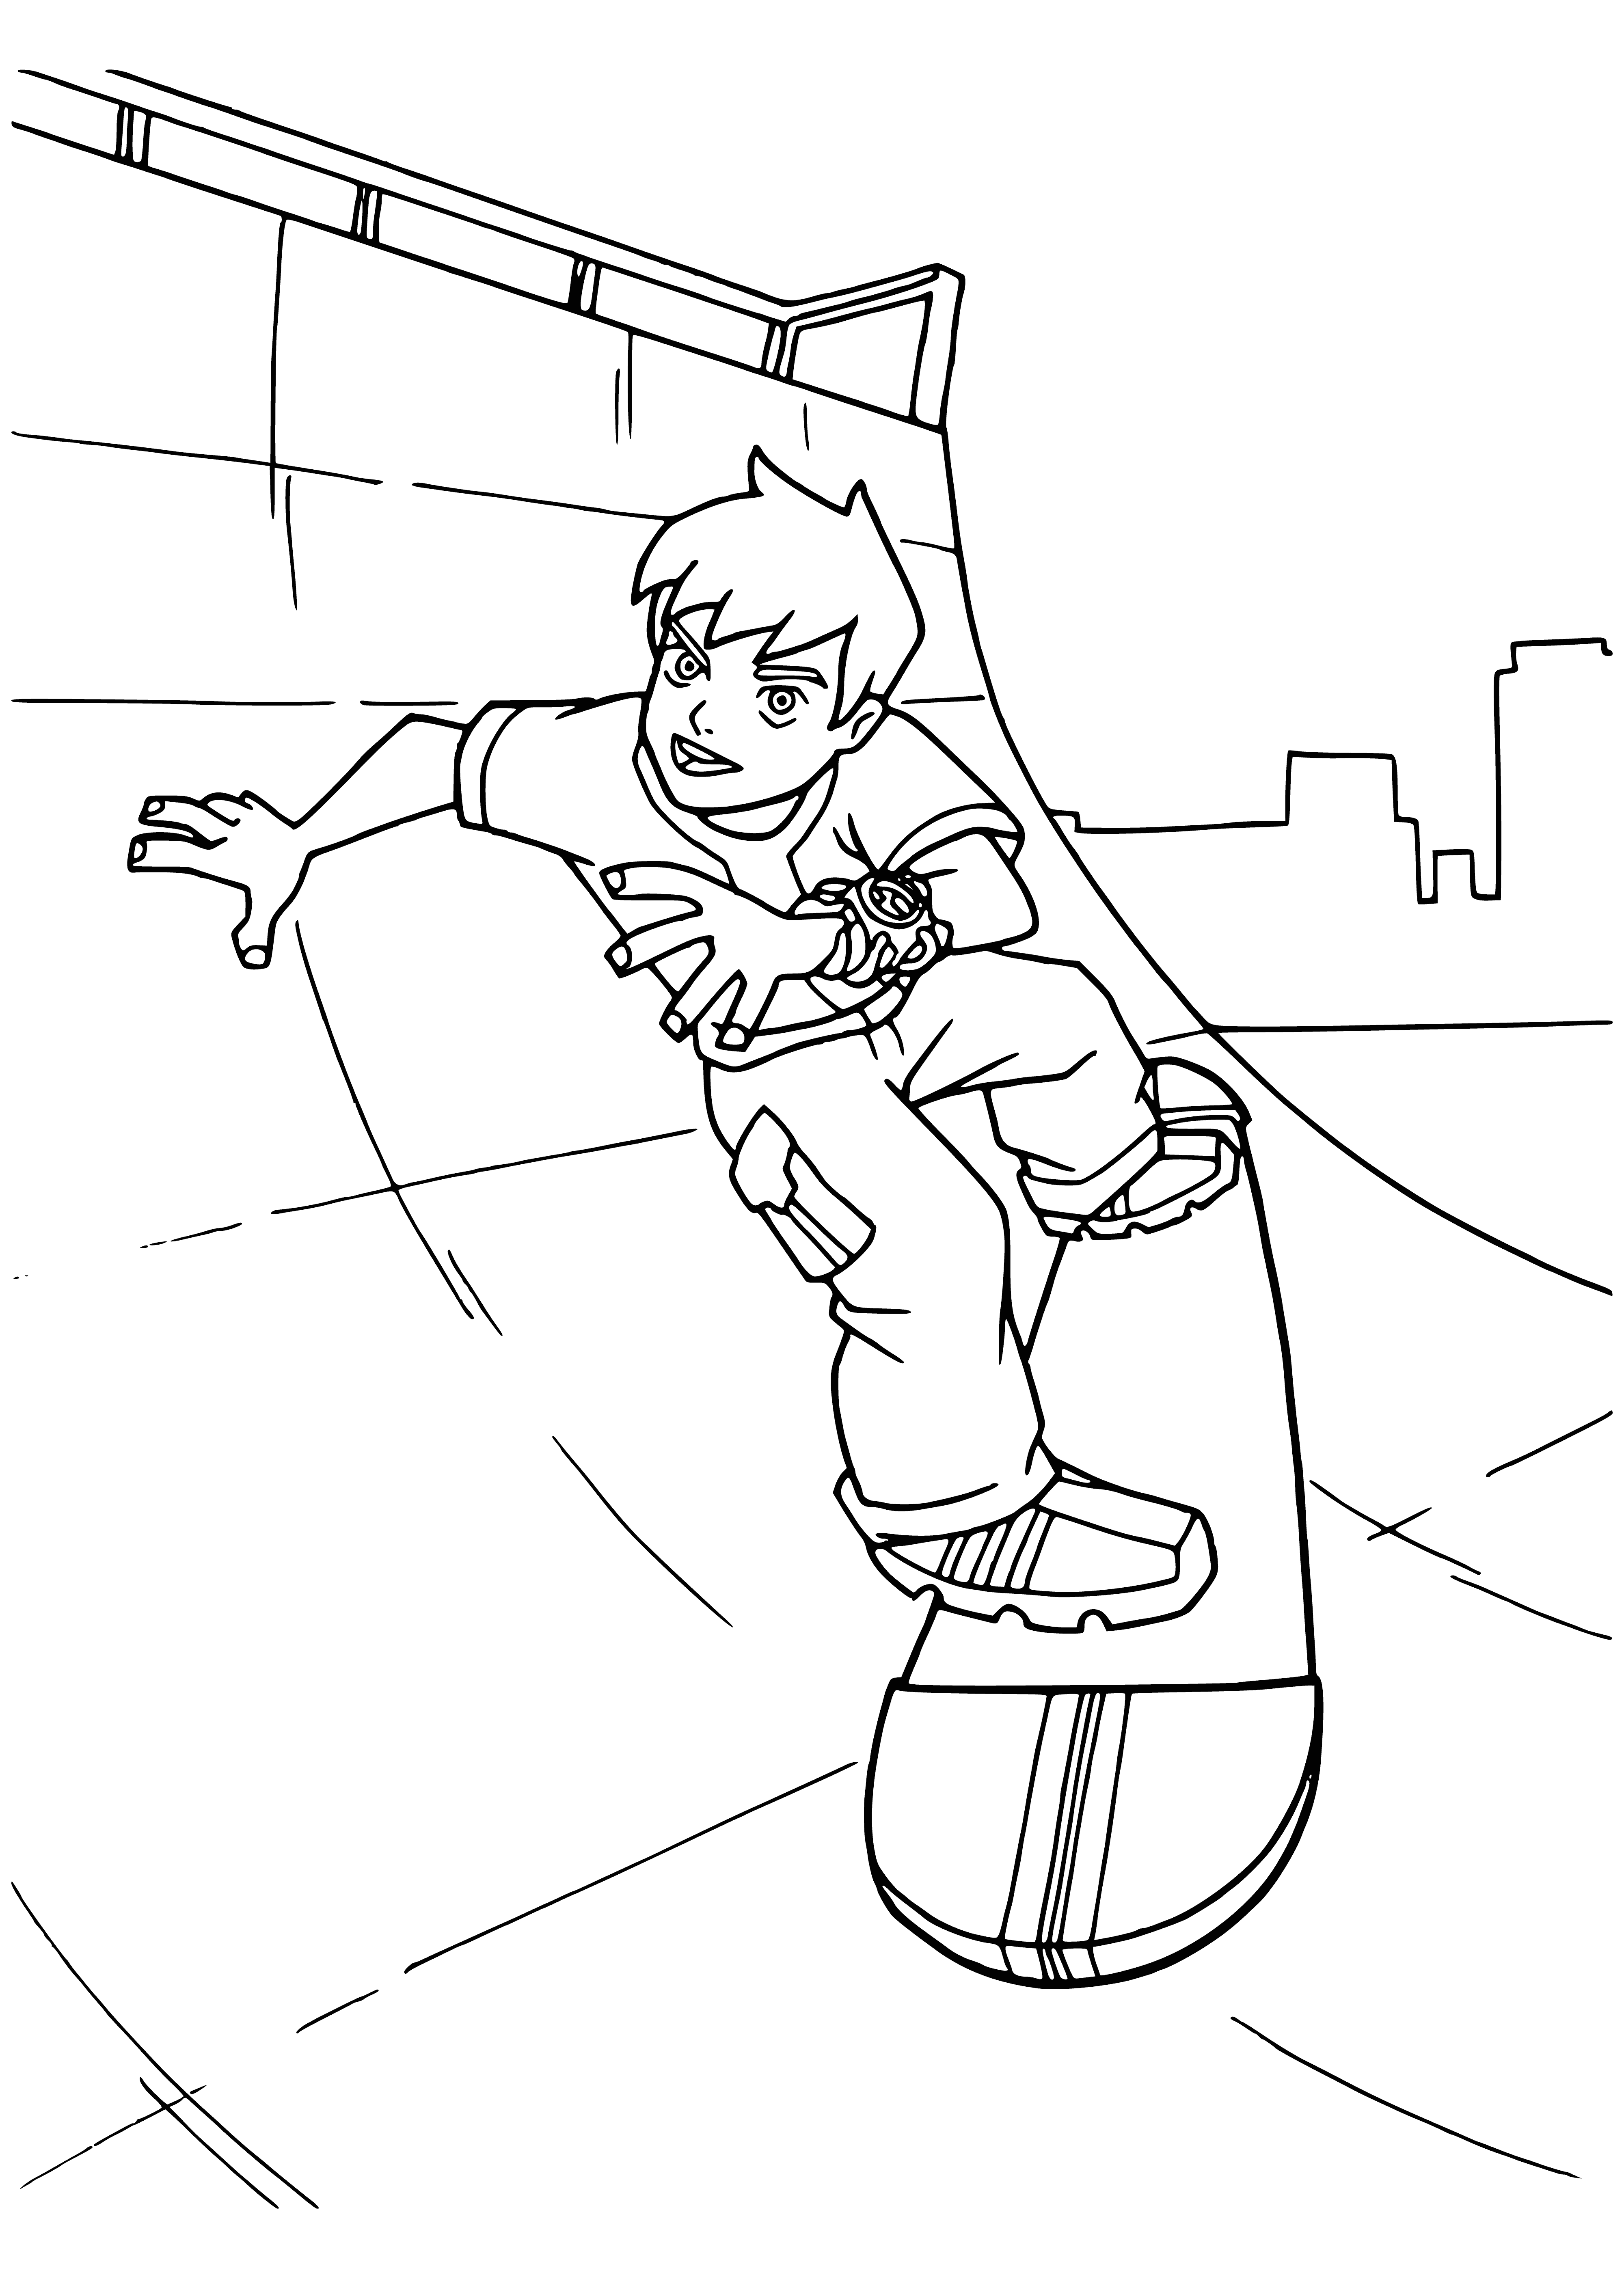 coloring page: Skateboarder in the air doing a trick, wearing helmet, pads and gloves, while carrying a backpack.